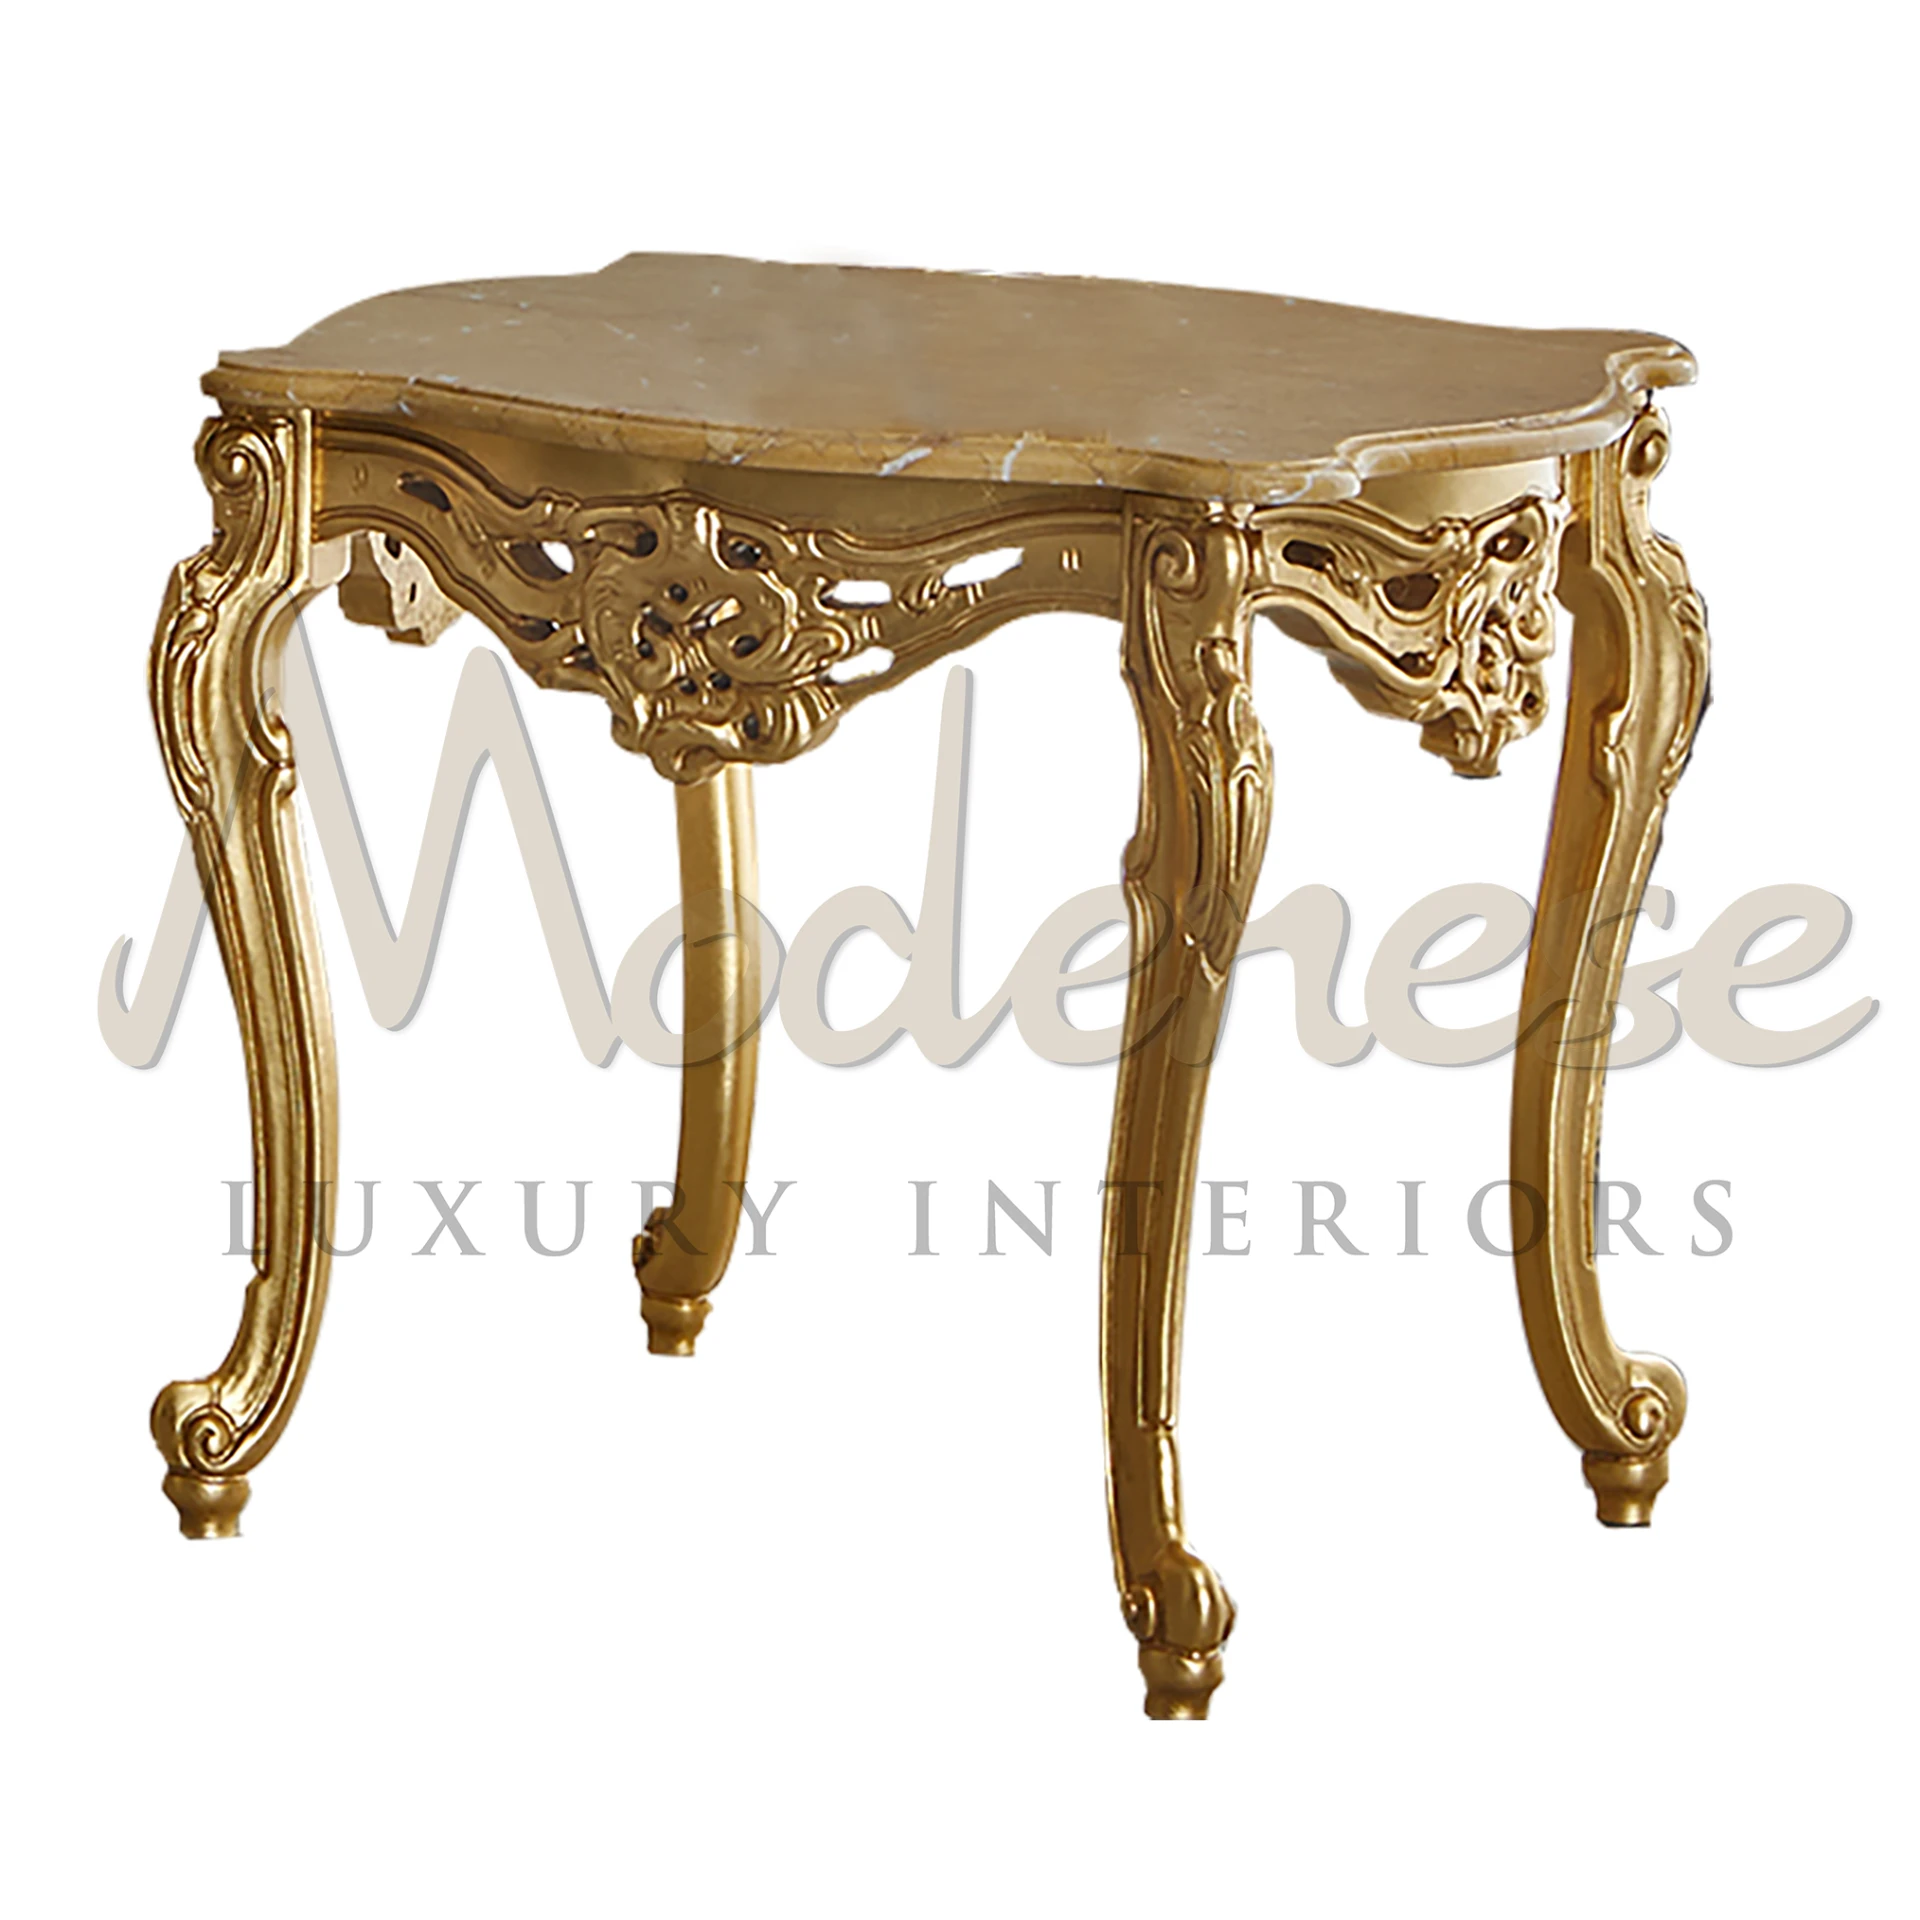 Luxurious Classic Gold Leaf Side Table, crafted from solid wood, embodies elegance with its gold leaf finish for opulent interiors.